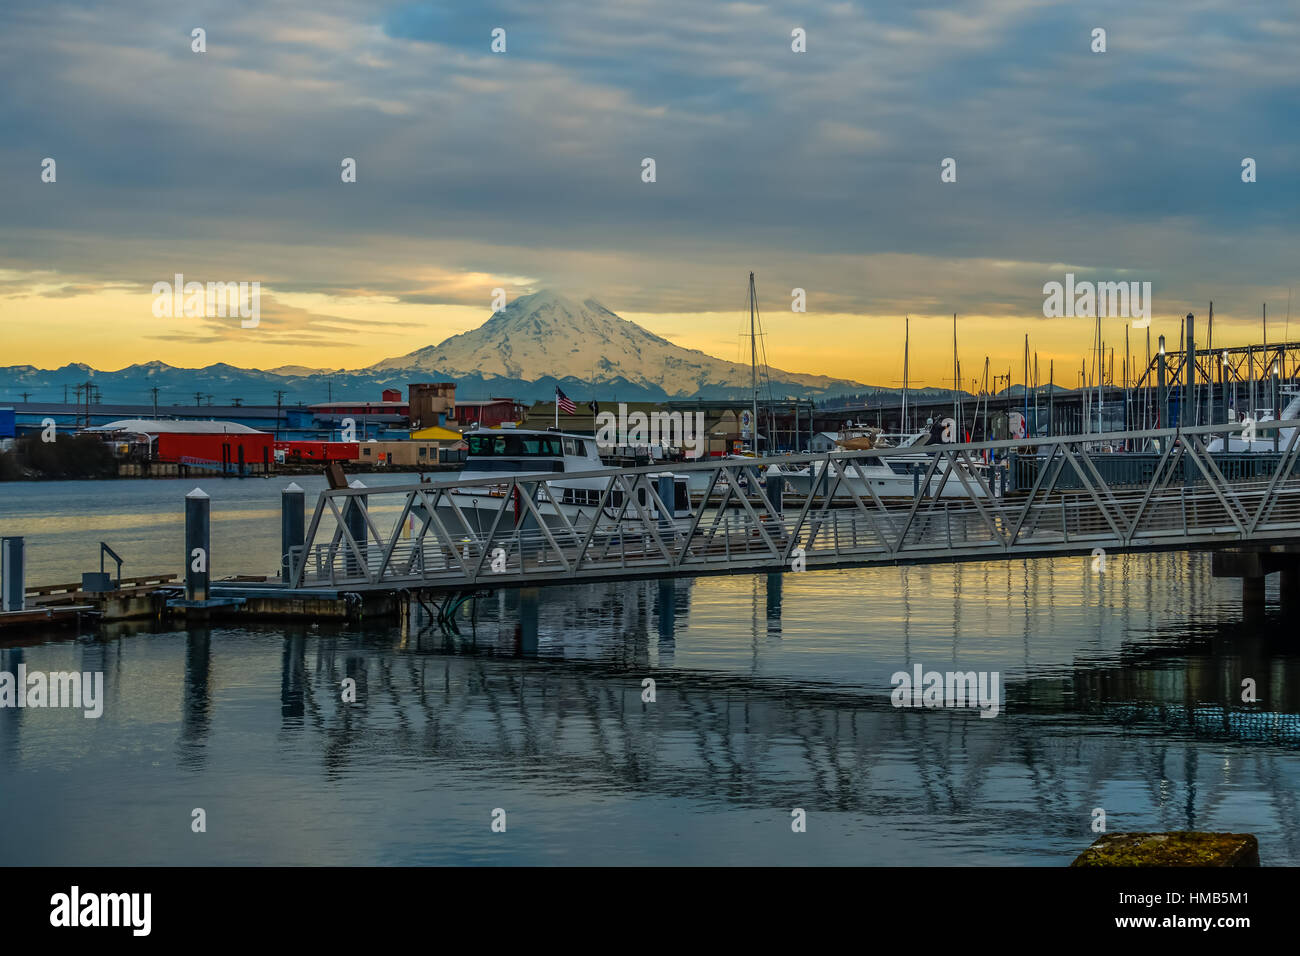 A view of Mount Rainier from a marina in Tacoma, Washington. HDR image. Stock Photo